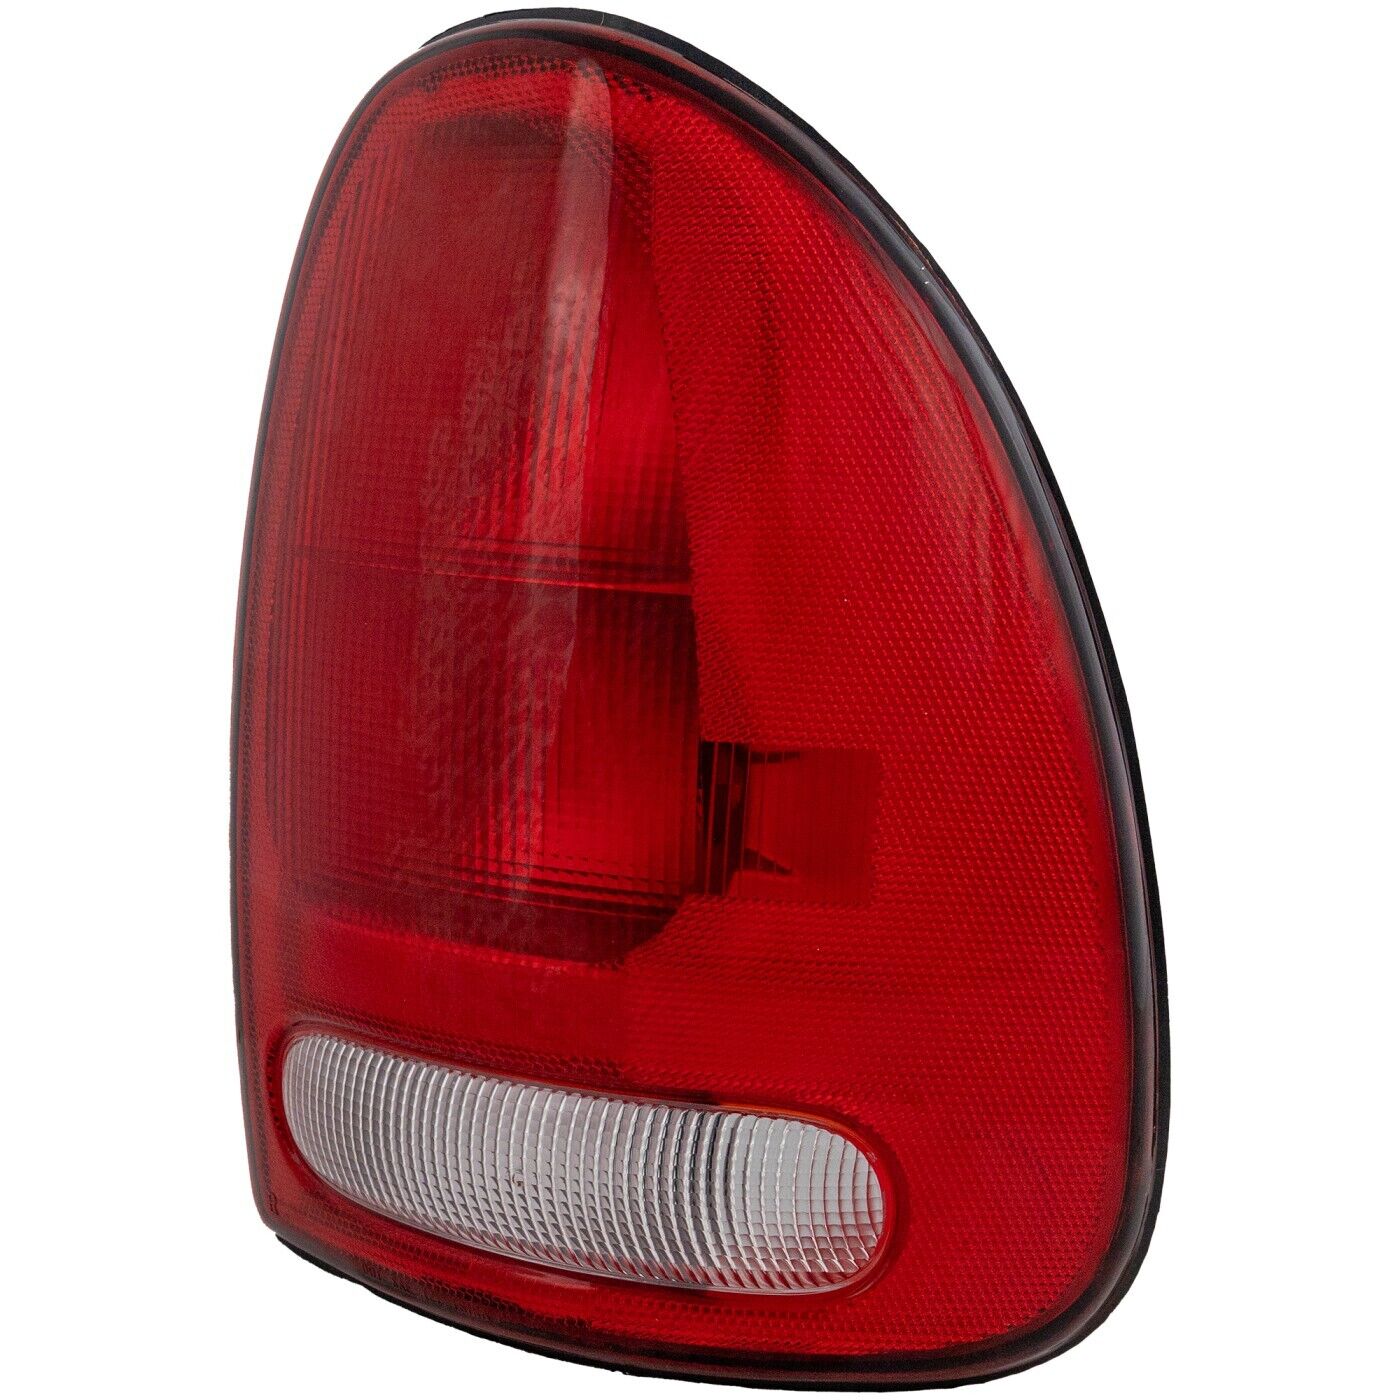 Tail Light Lens and Housing Right For Dodge 98-03 Durango 96-00 Grand Caravan